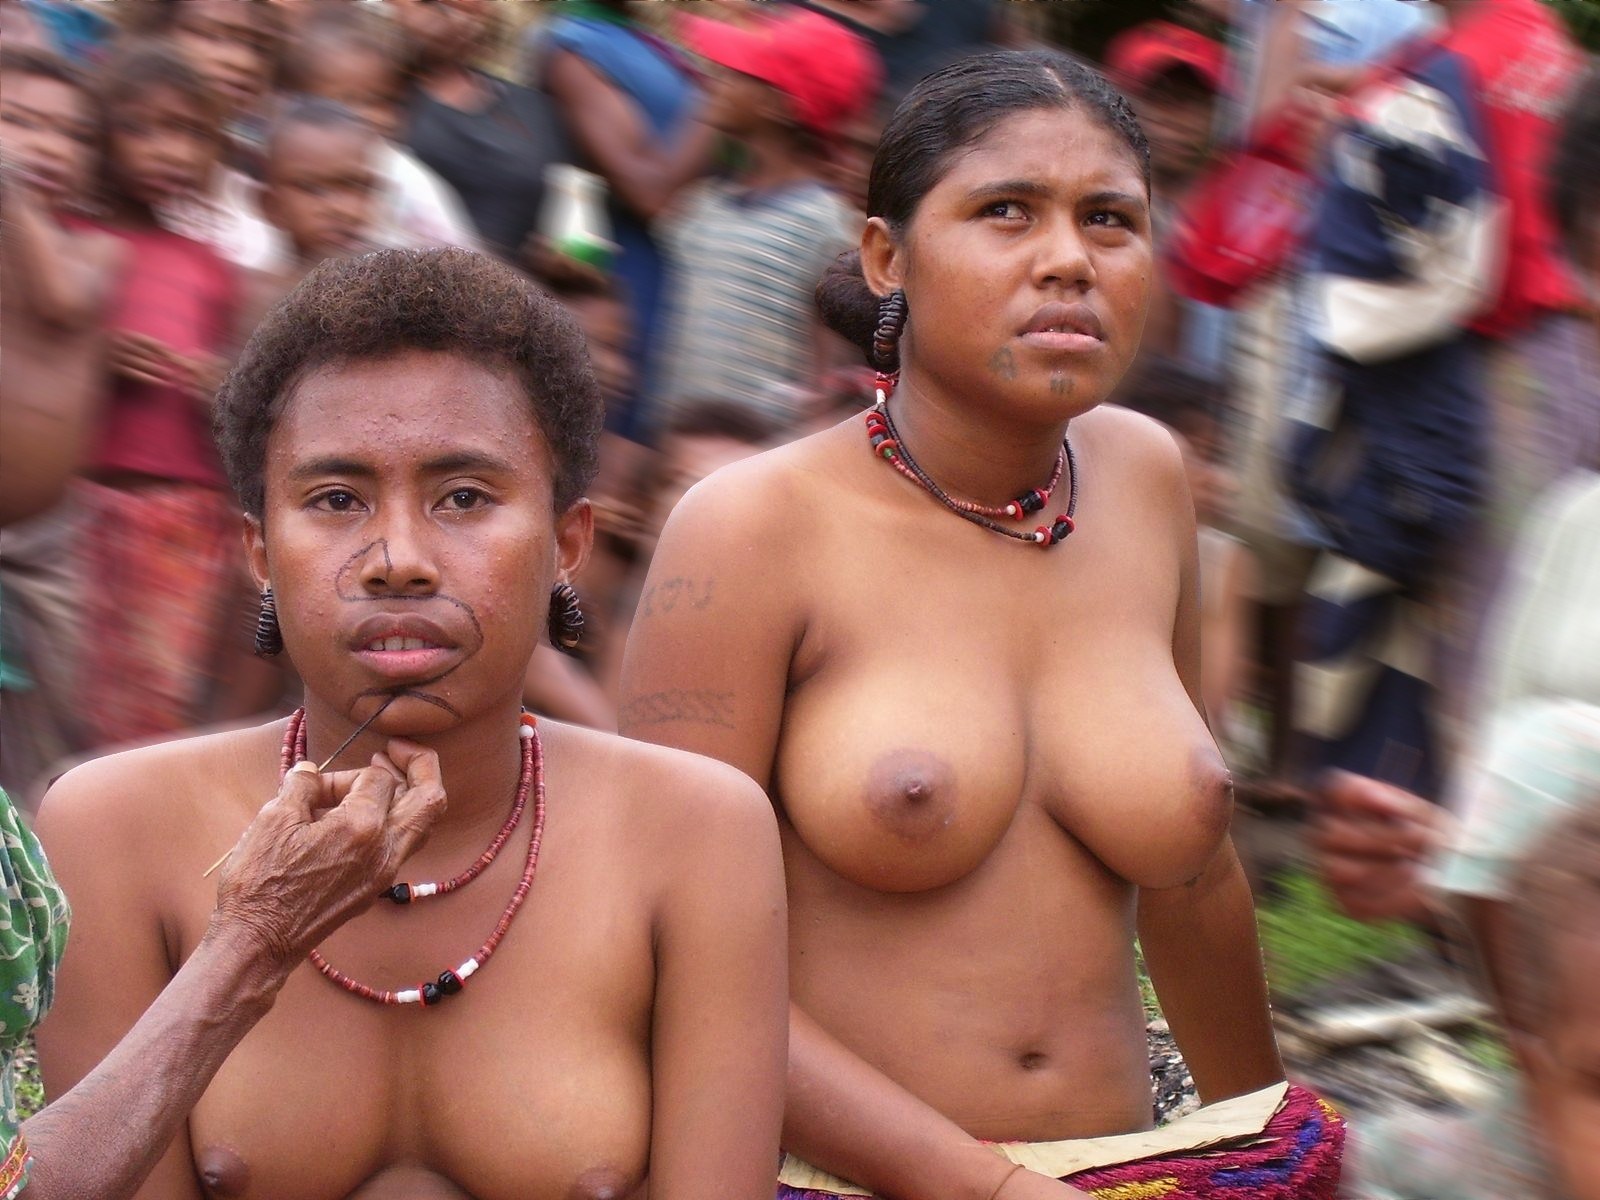 Bare Boobs in Tribes (64 photos)